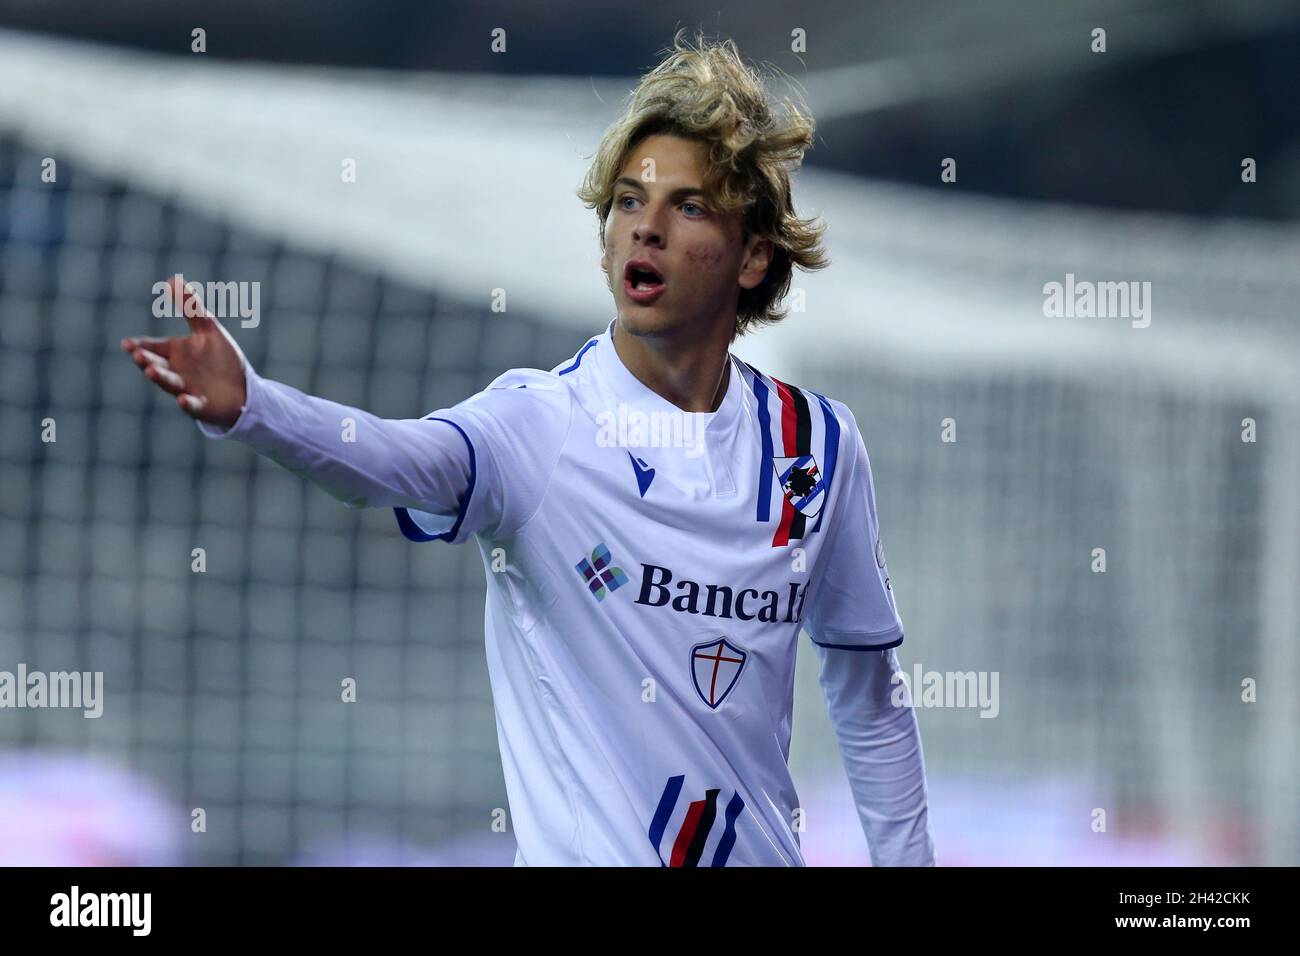 Riccardo Ciervo of Uc Sampdoria  gestures during the Serie A match between Torino Fc and Uc Sampdoria at Stadio Olimpico on October 30, 2021 in Turin, Italy. Stock Photo